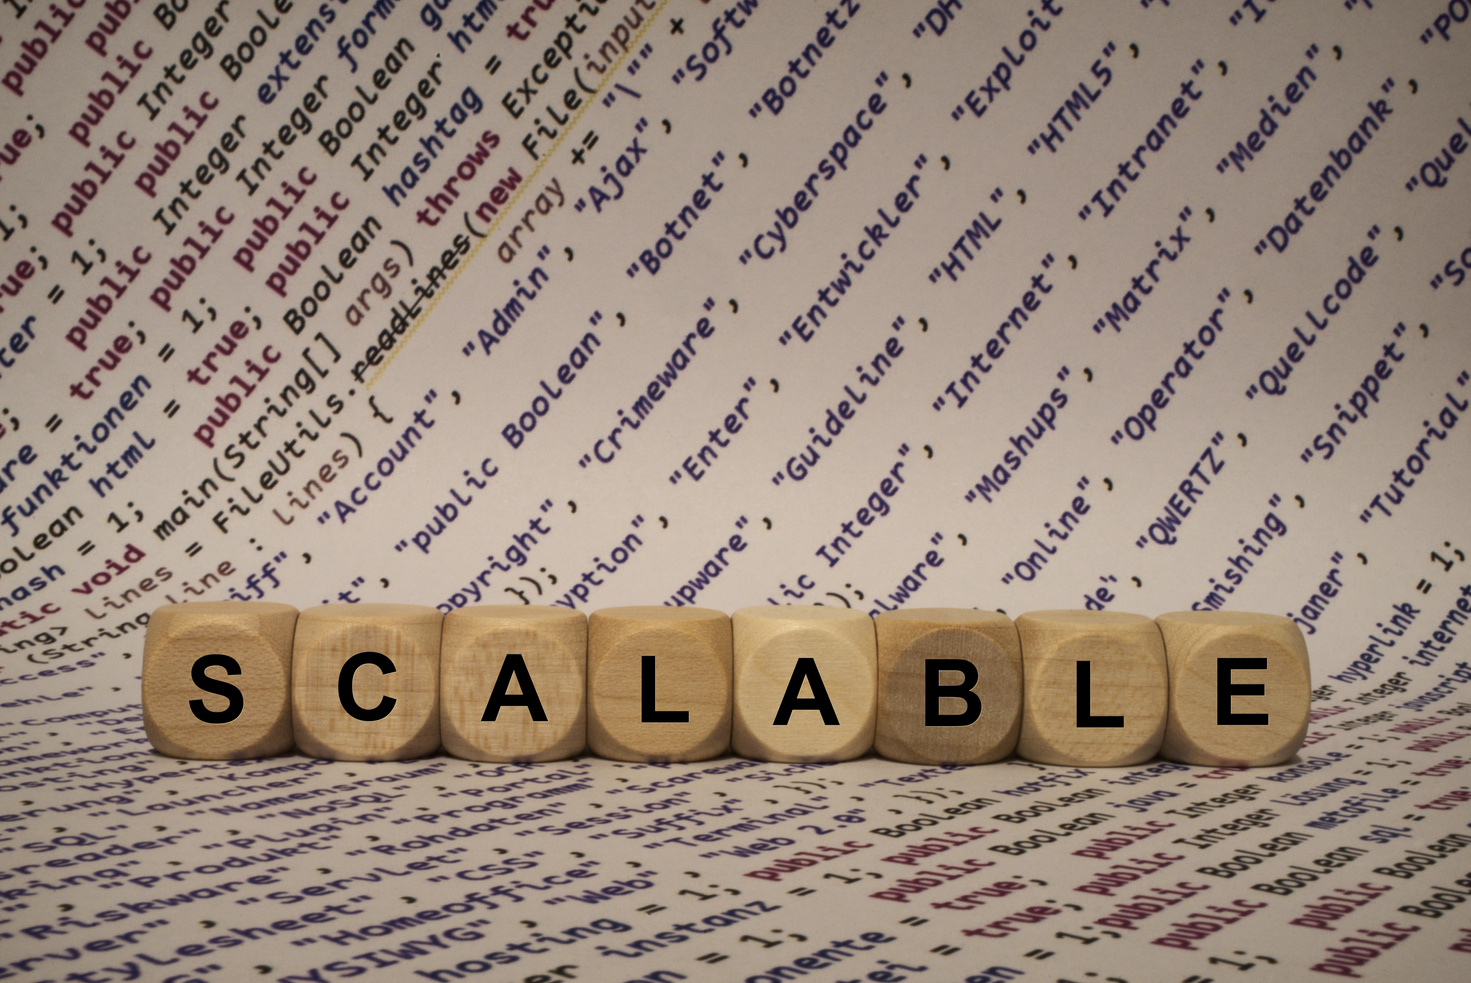 scalable - cube with letters and words from the computer, software, internet categories, wooden cubes